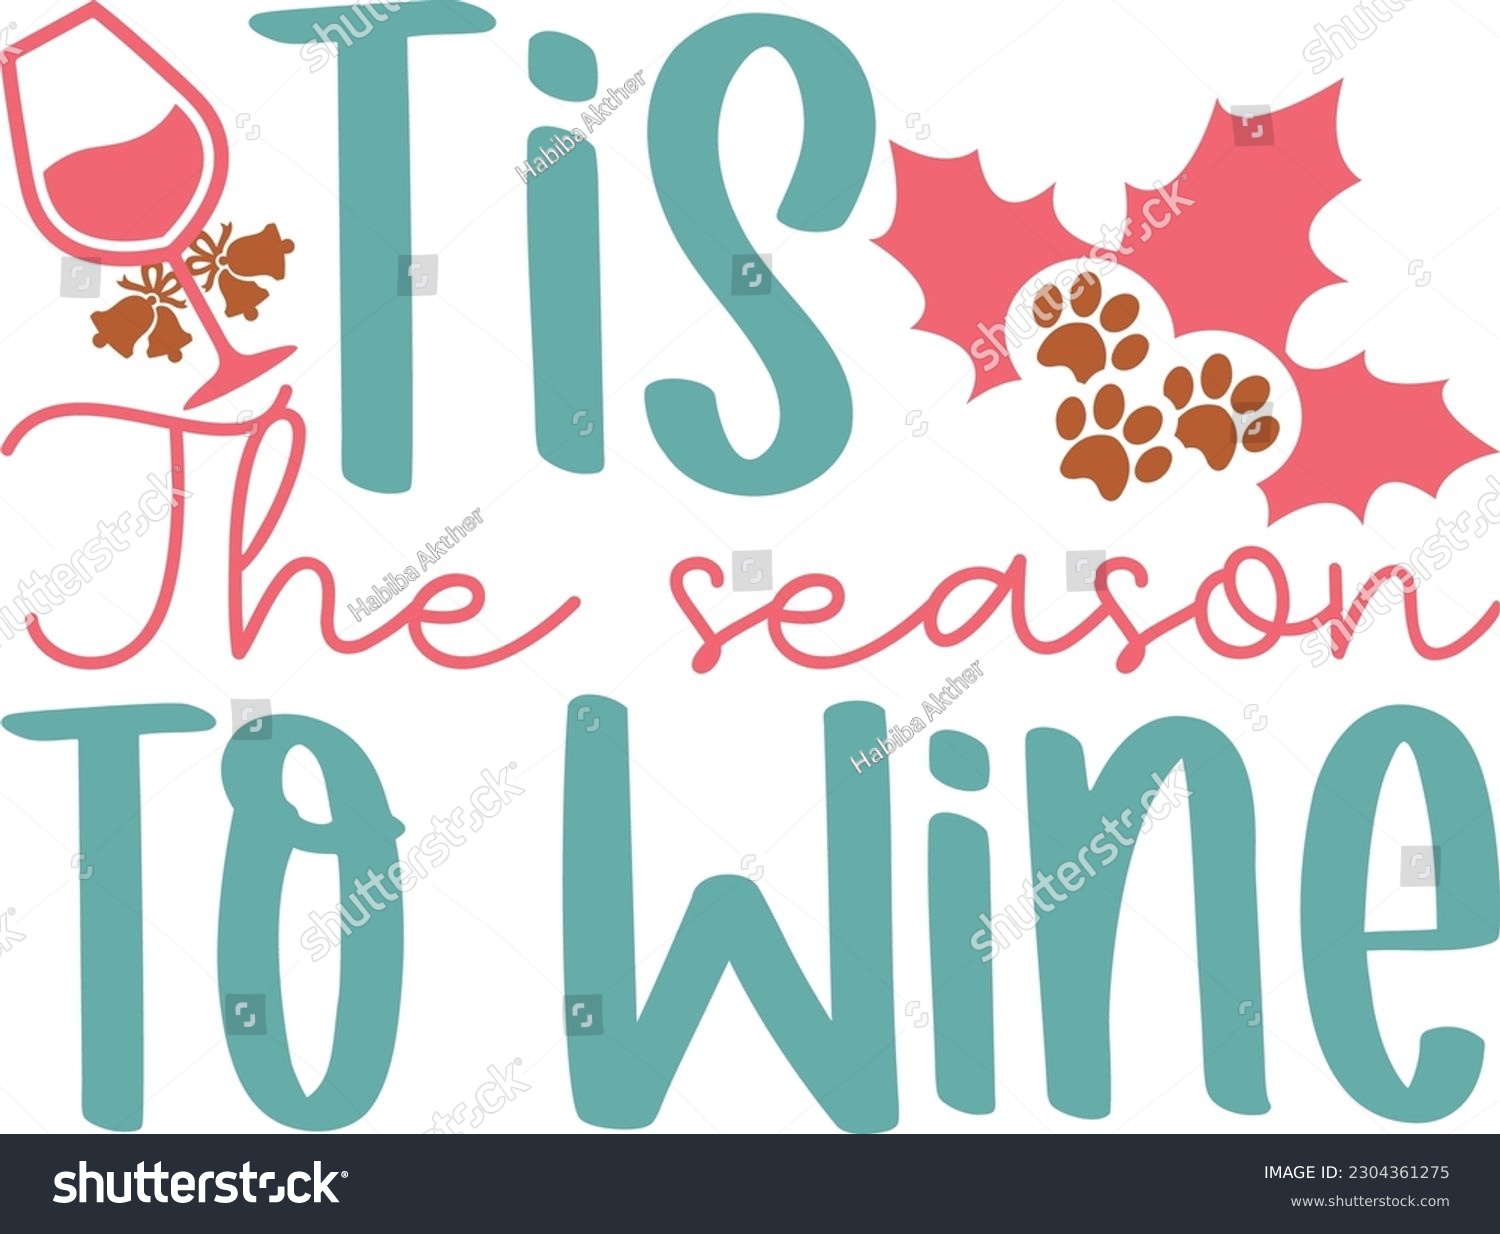 SVG of Tis The Season To Wine,Merry Christmas svg, Christmas svg,Christmas Trees,Christmas Shirt,Holiday svg,Winter svg,Hand Lettered,Santa svg,Sign,Funny,Silhouette,Eps,Vector,Sublimation,Meowy,Dog,Elf svg, svg